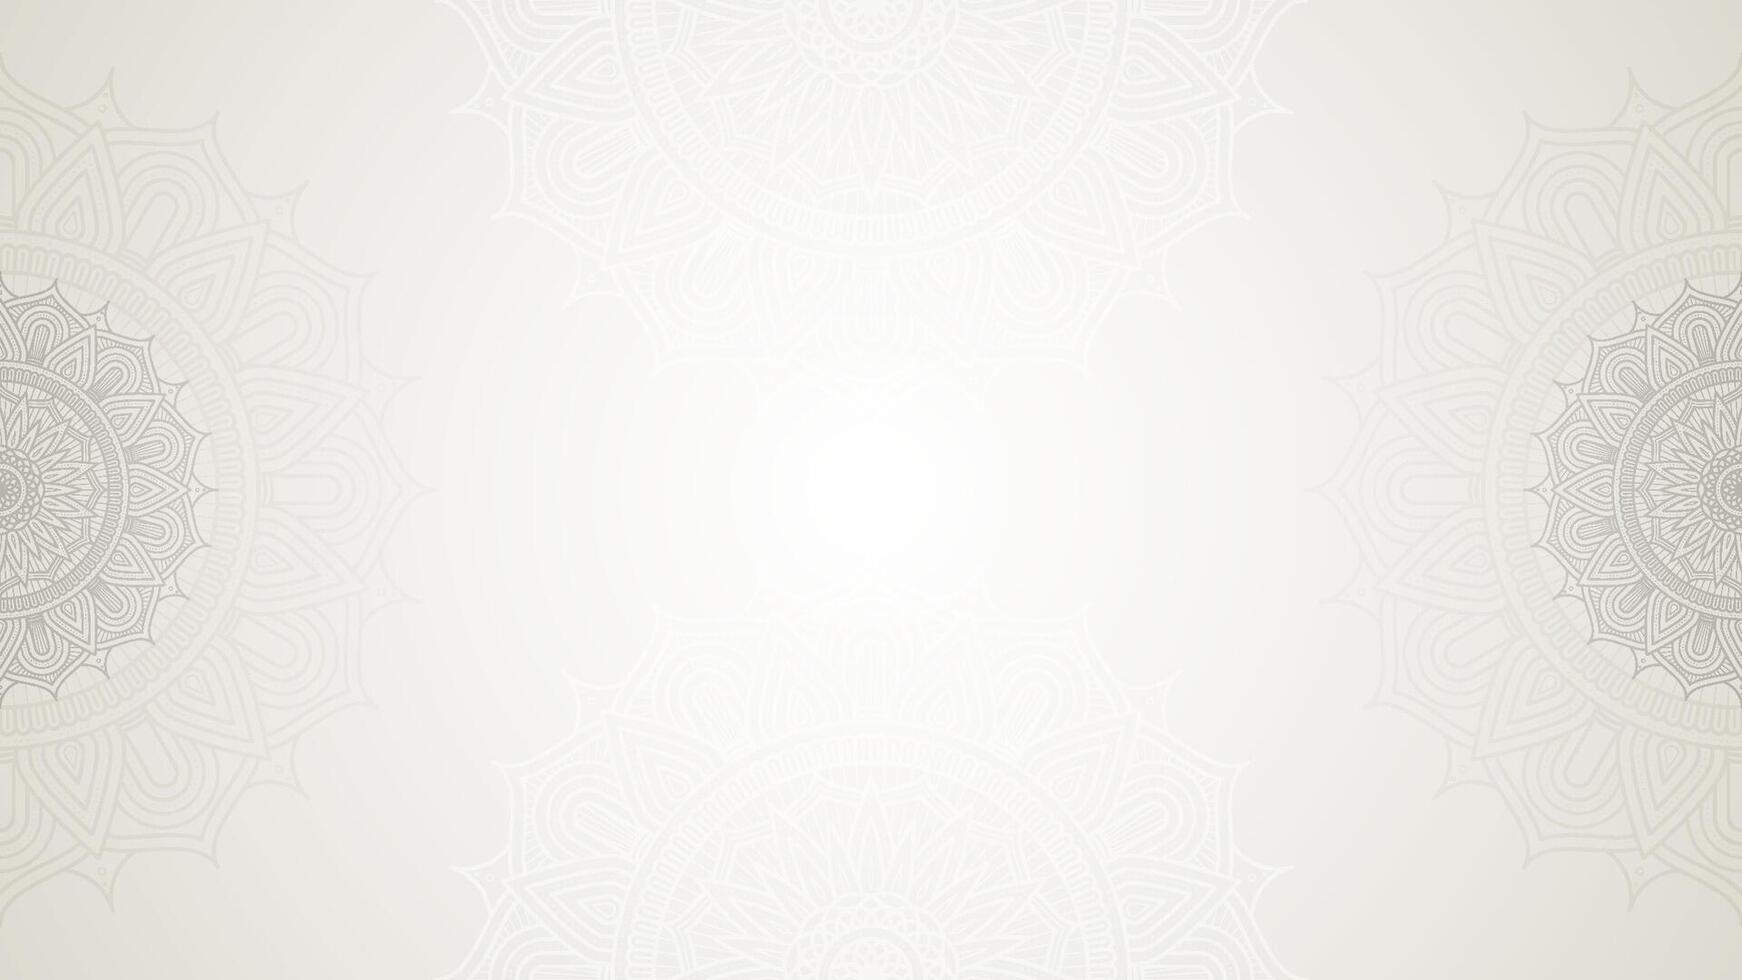 Intricate Beige Mandala Border Art With Clean And Soft Blank Horizontal Vector Background